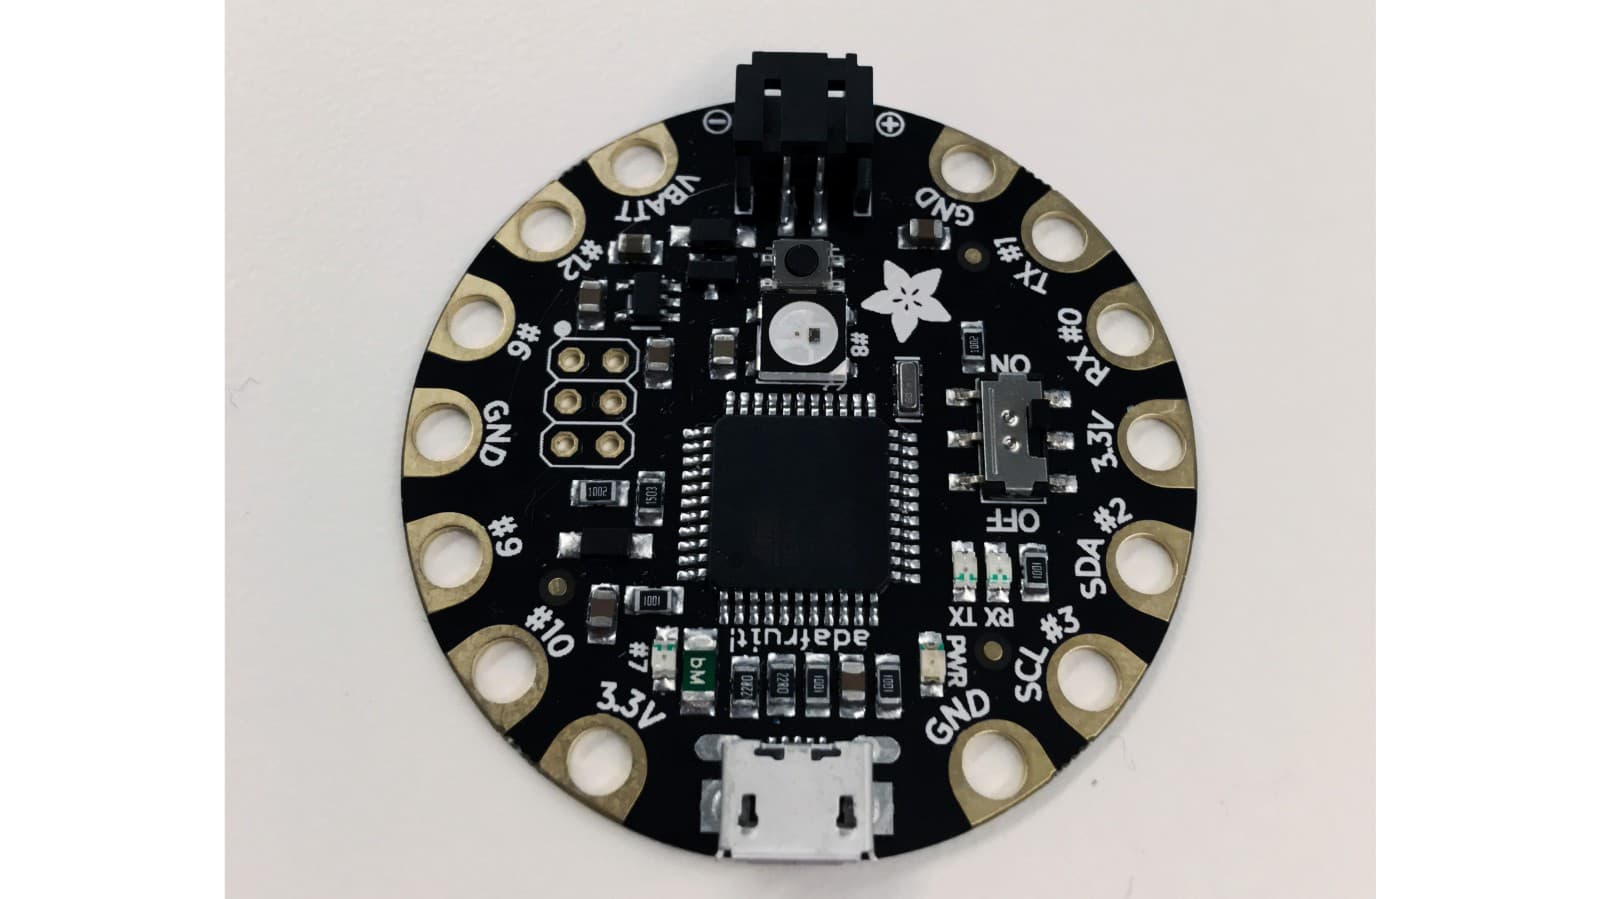 A photo of the Flora microcontroller